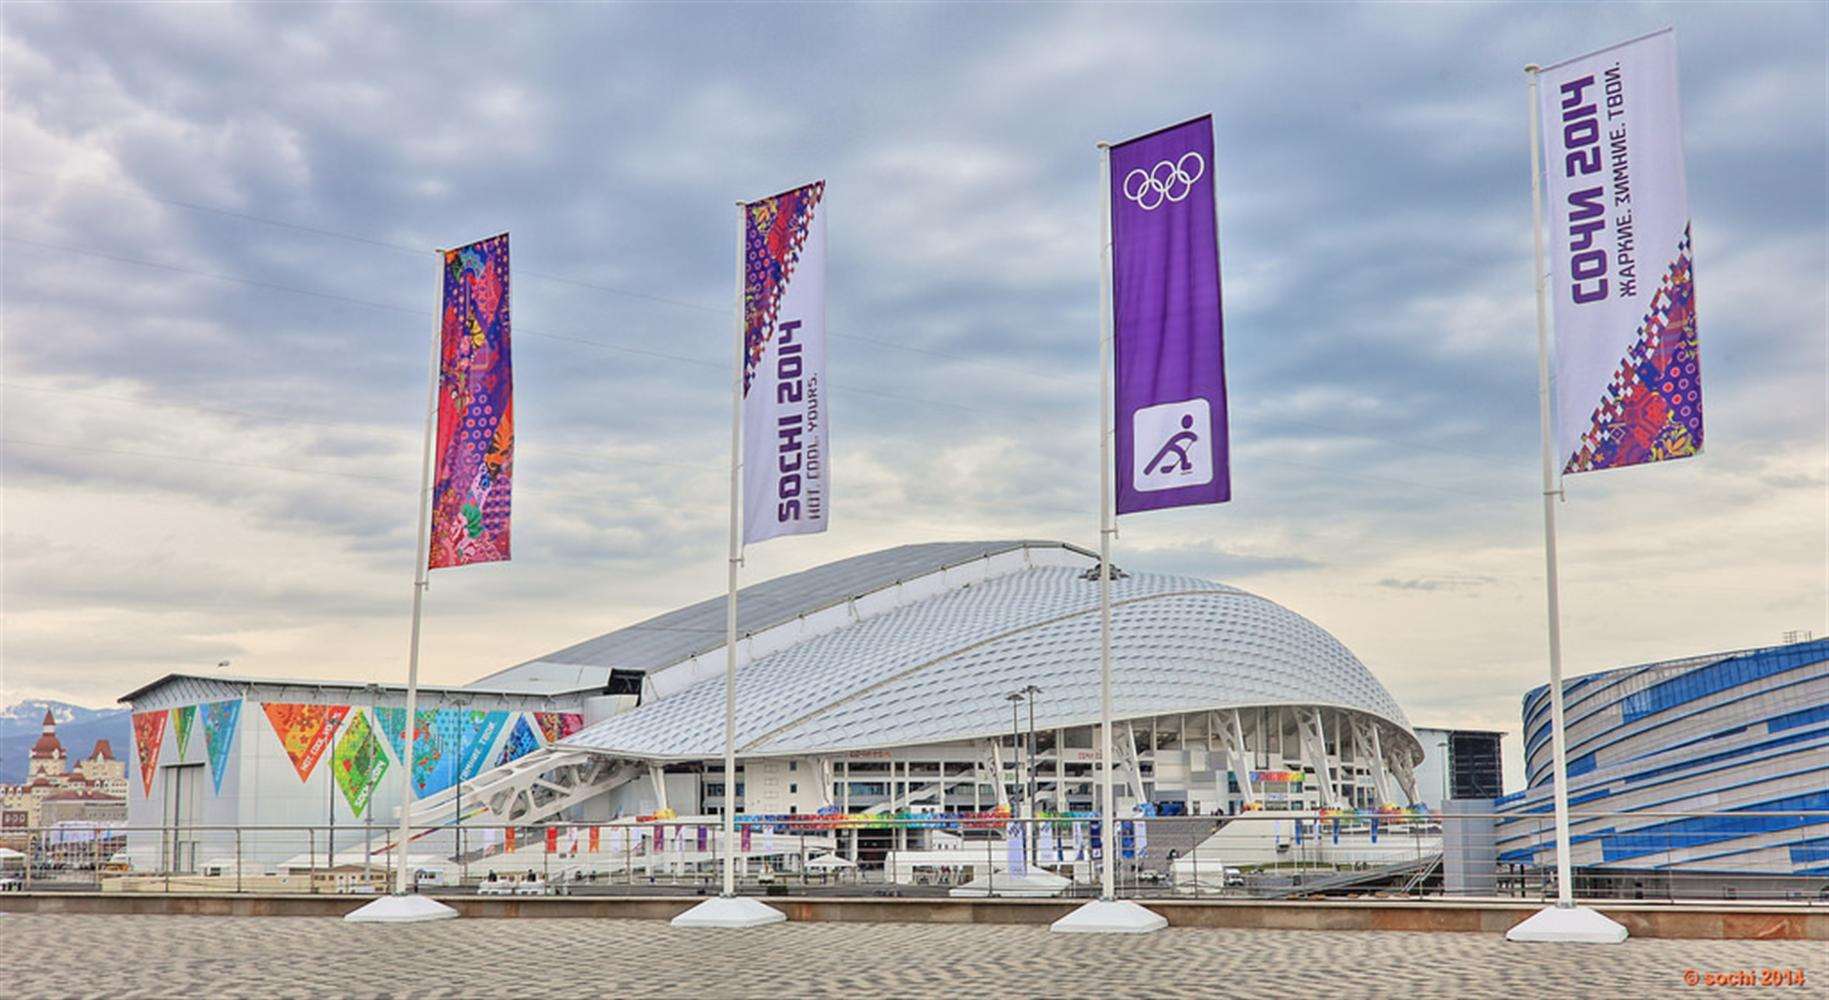 The Fisht Olympic Stadium where much of the Sochi 2014 Winter Games took place. Picture: Sochi 2014